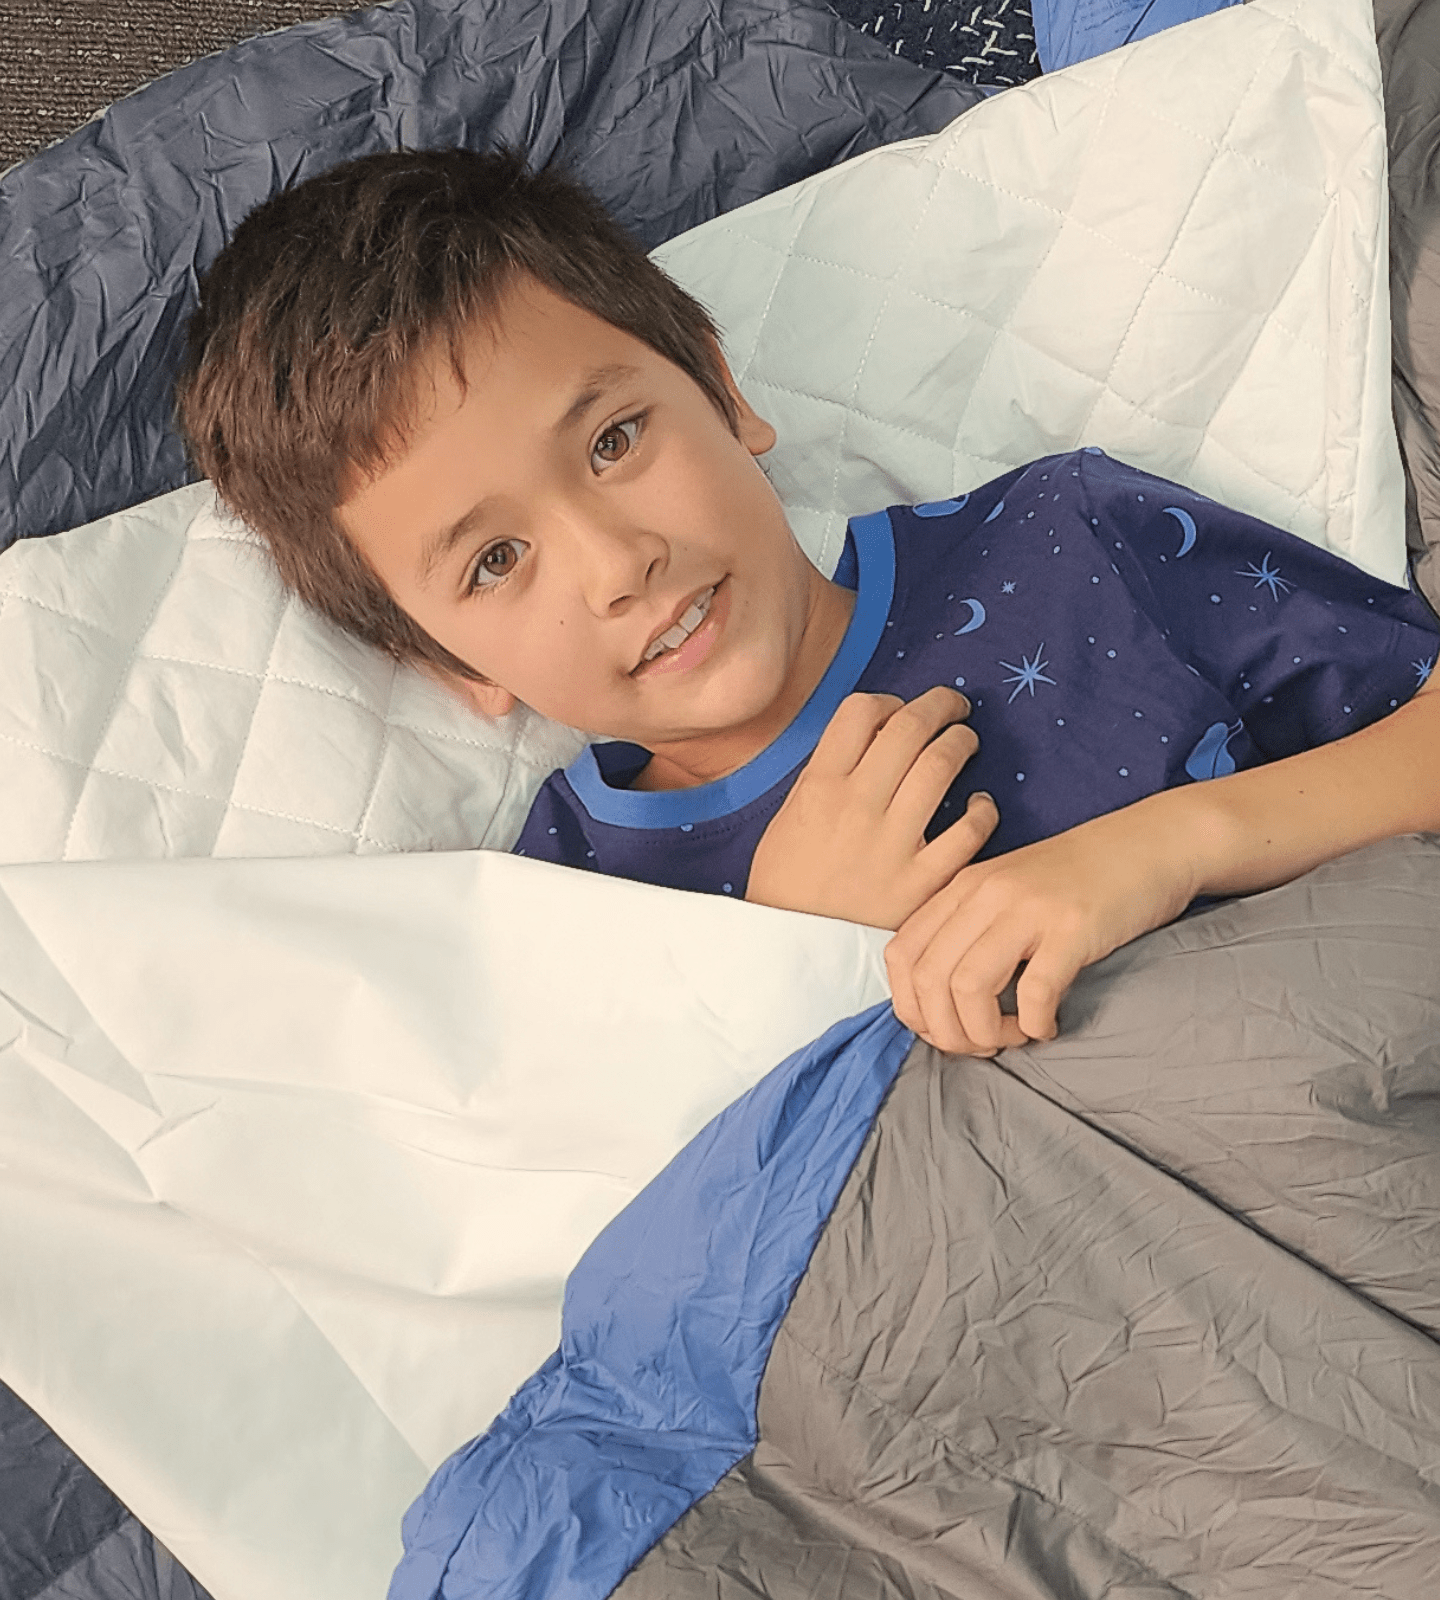 Quilted Sleeping Bag Liner - Brolly Sheets AU